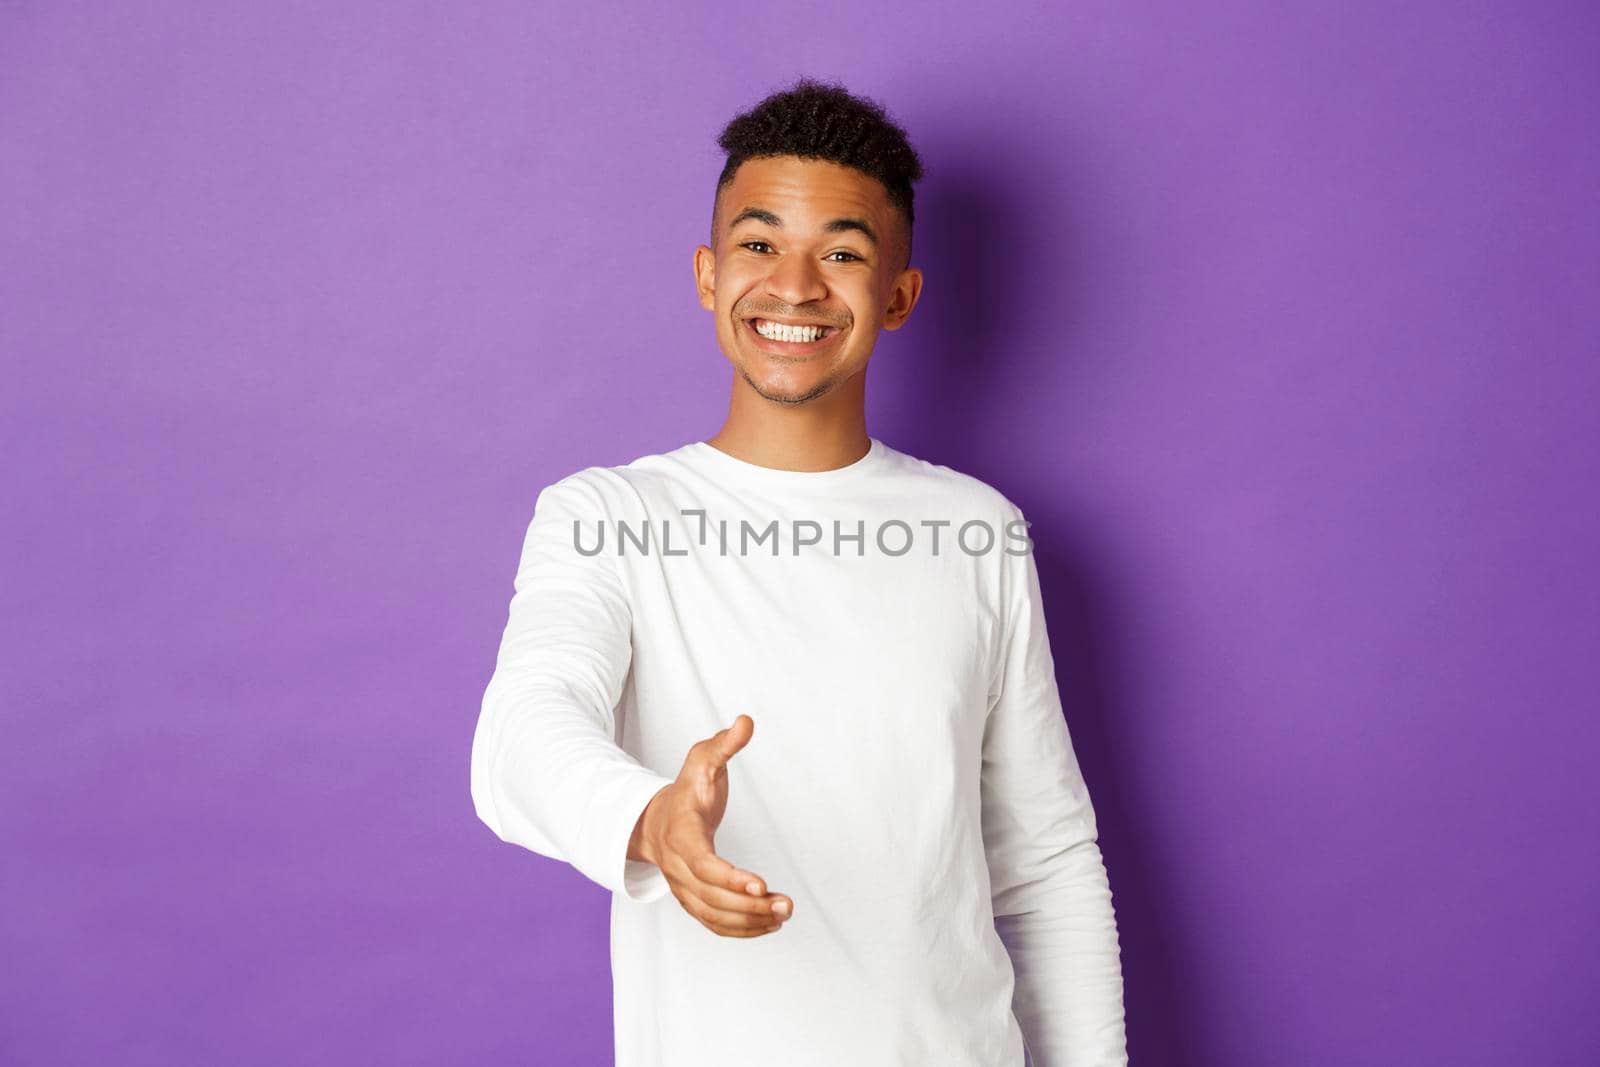 Image of handsome young african-american man, smiling friendly while extending hand for handshake, greeting someone, standing over purple background.